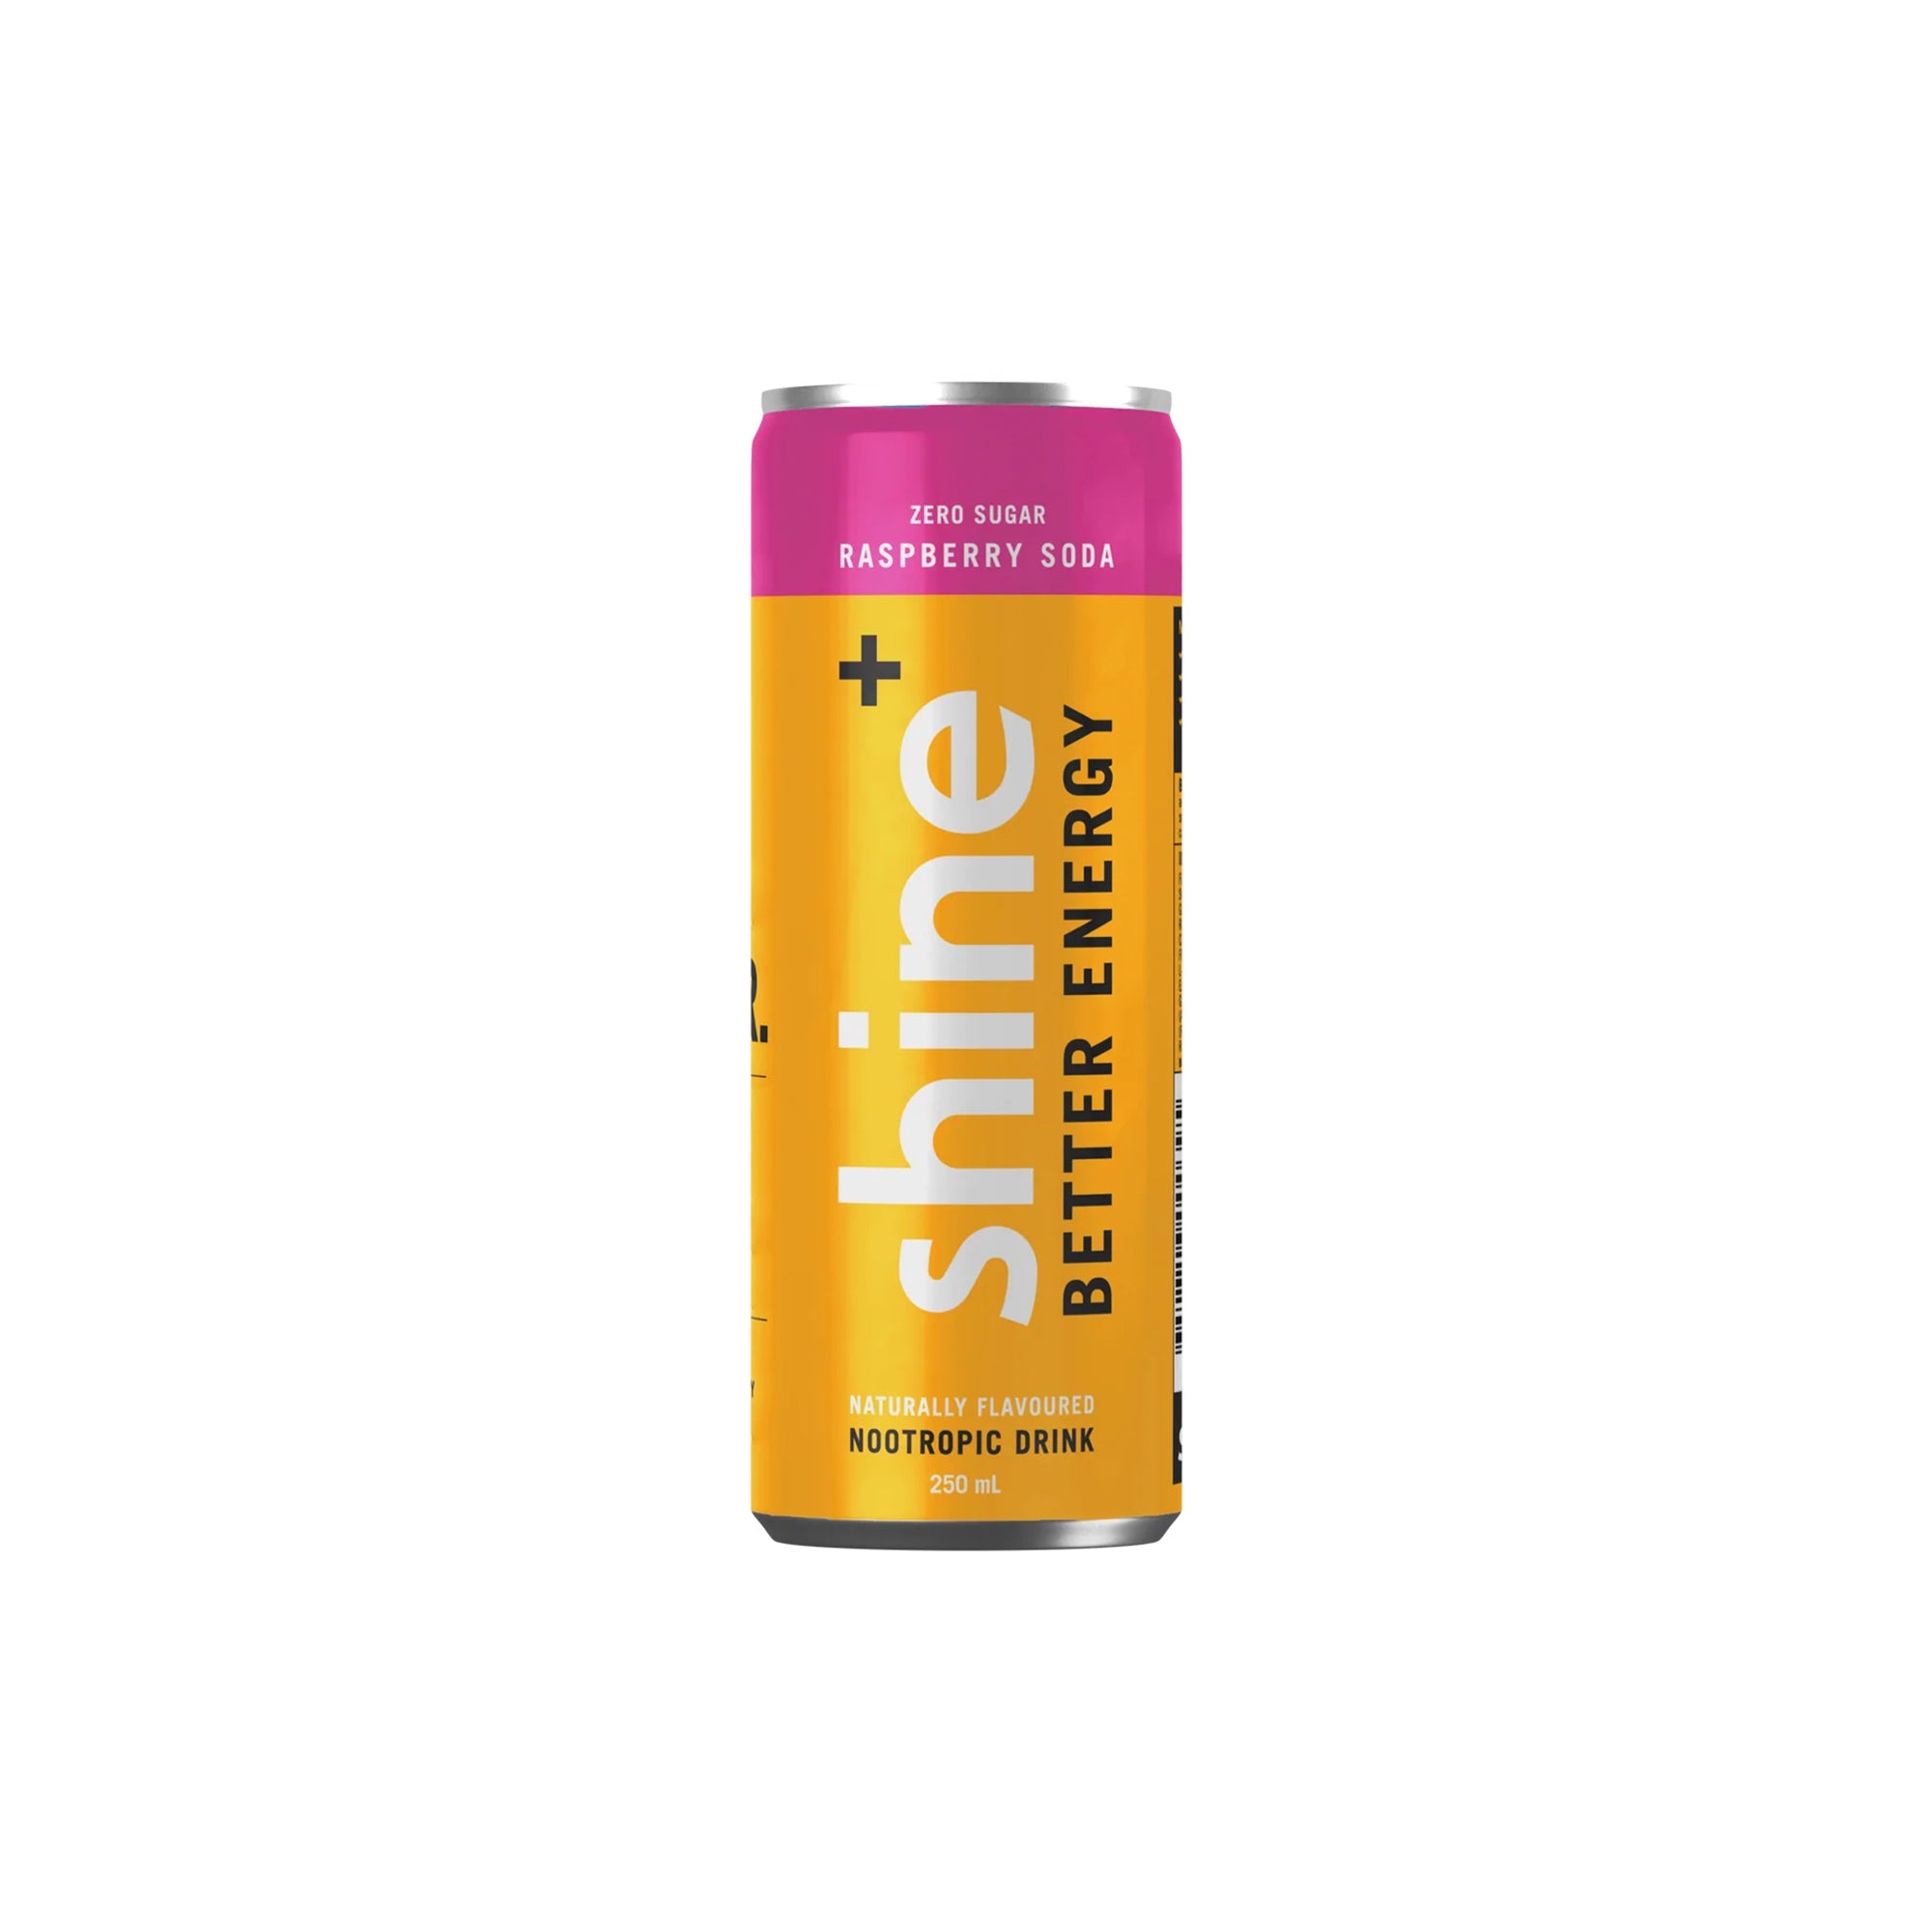 Shine+ Nootropic Drink 250ml Cans (1pc)